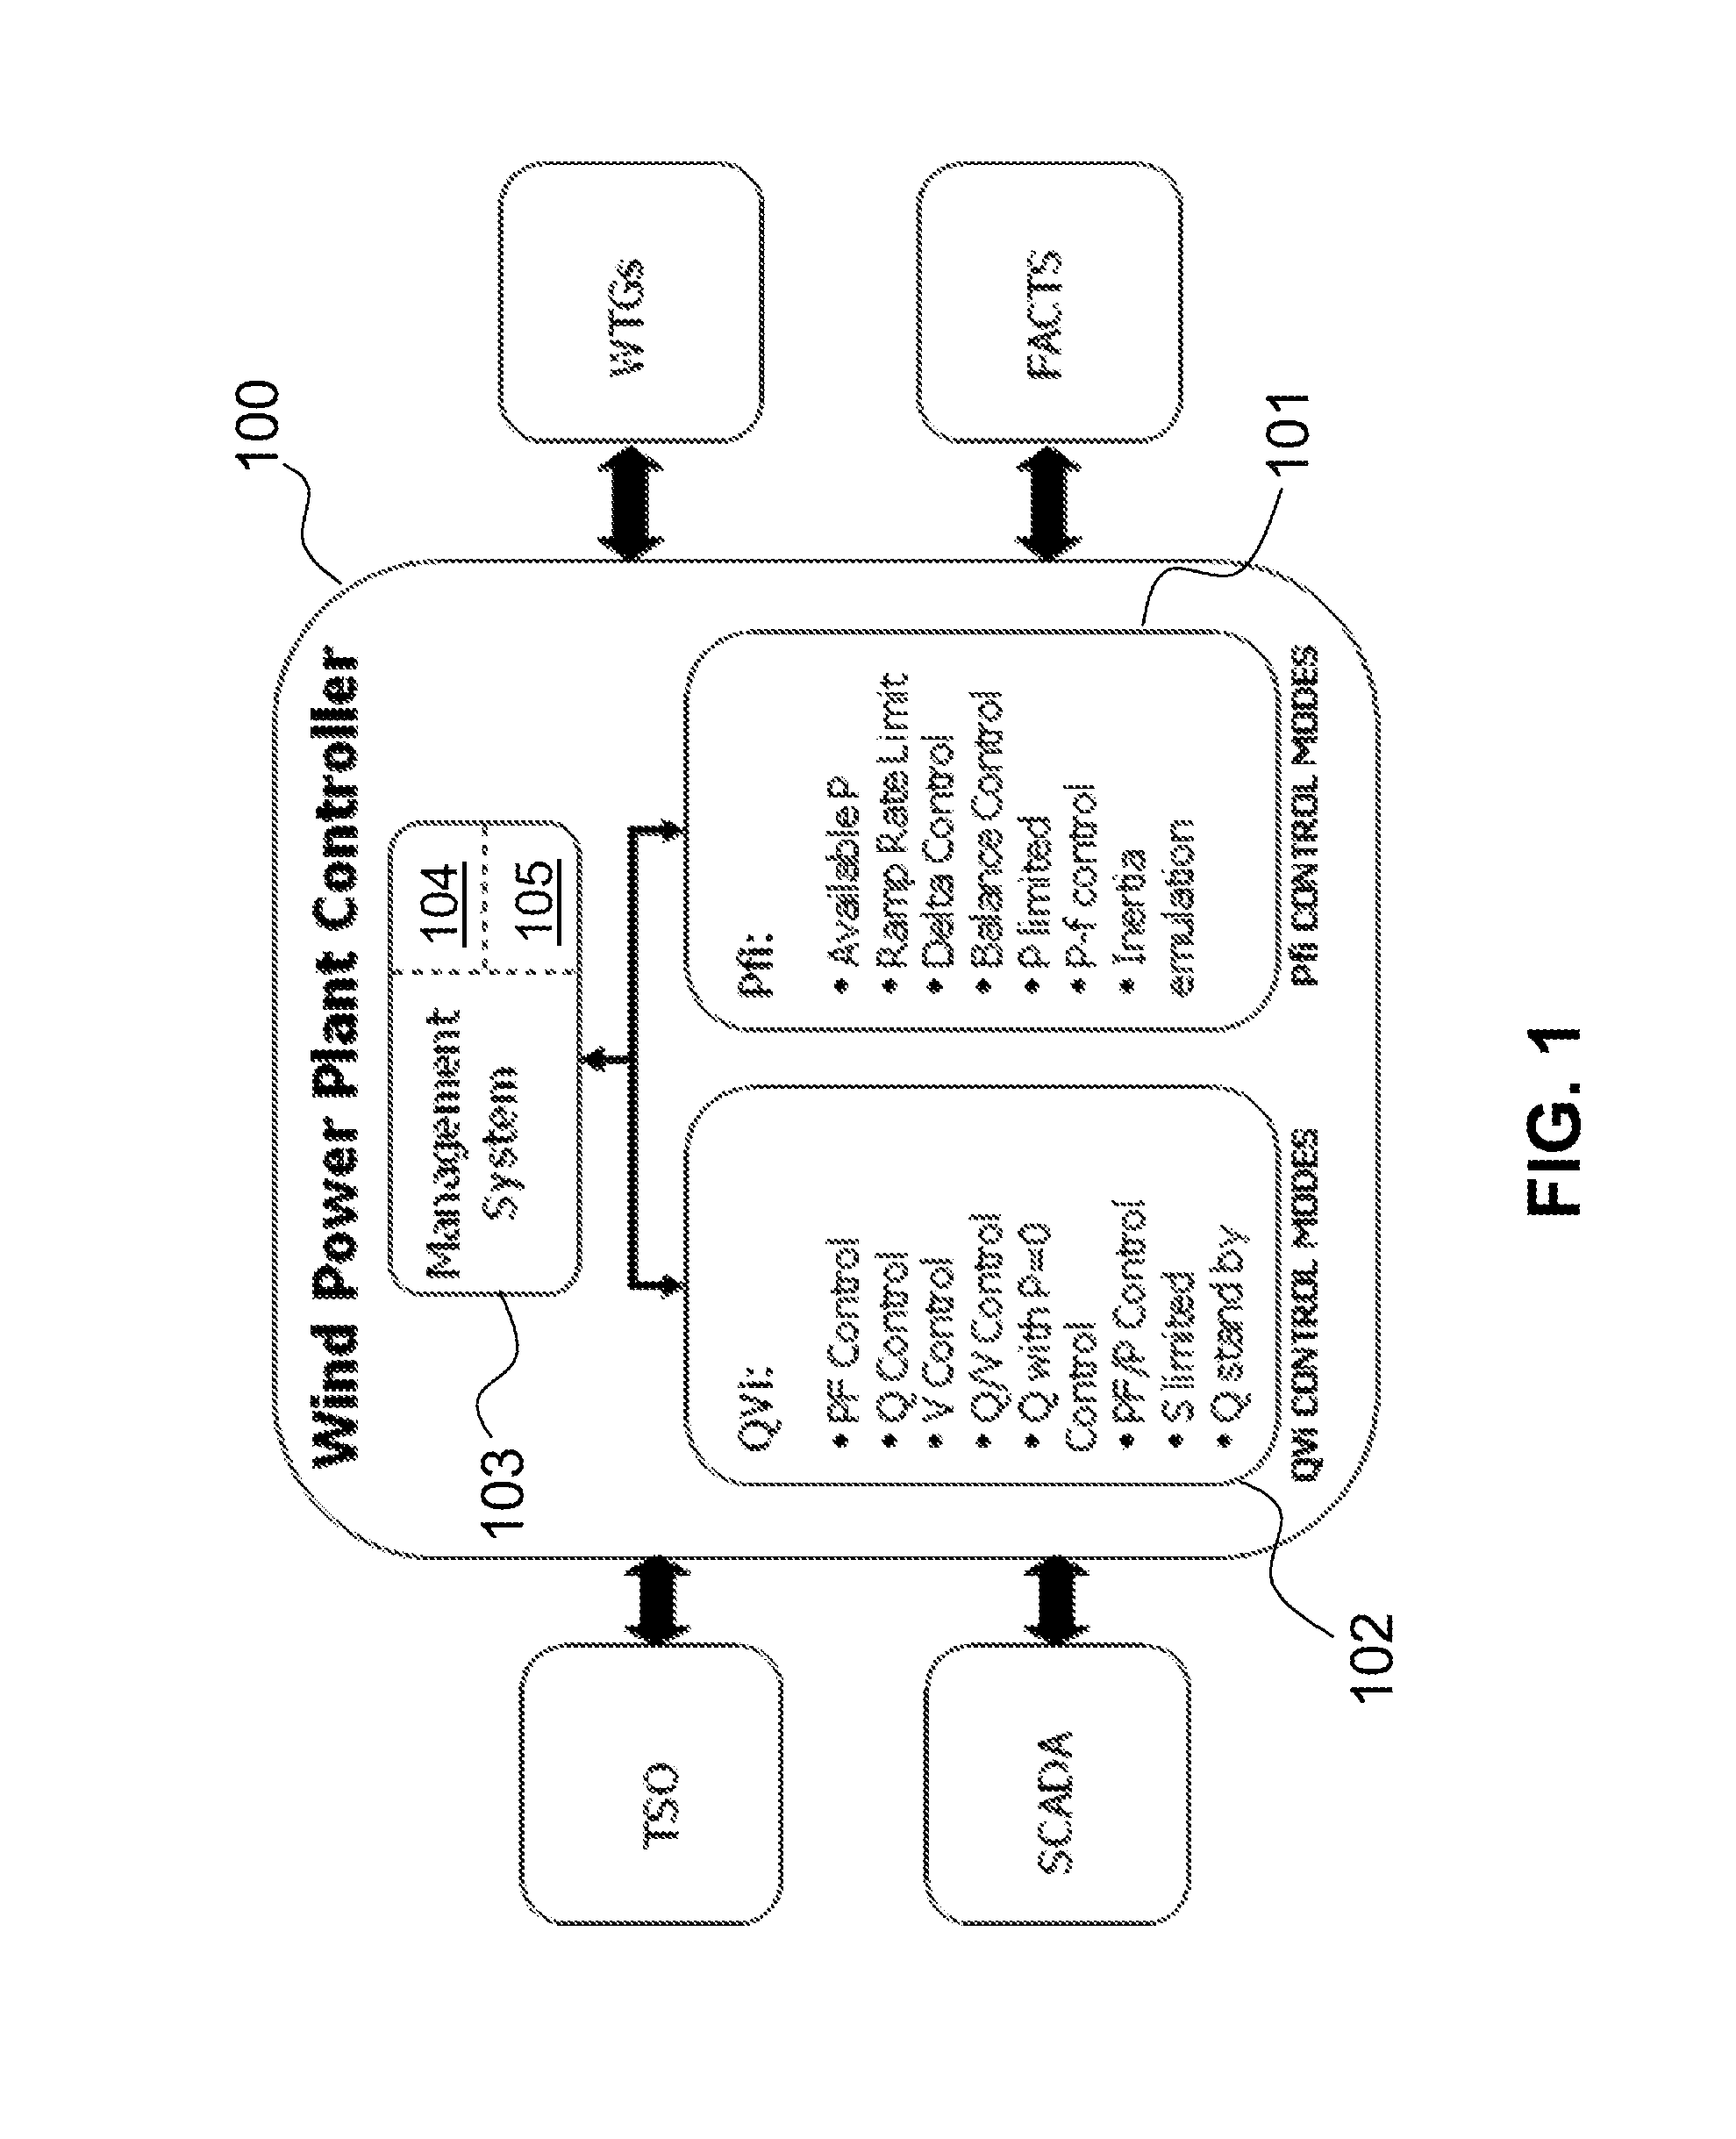 System and a method for setting up, commissioning and operating a wind power plant